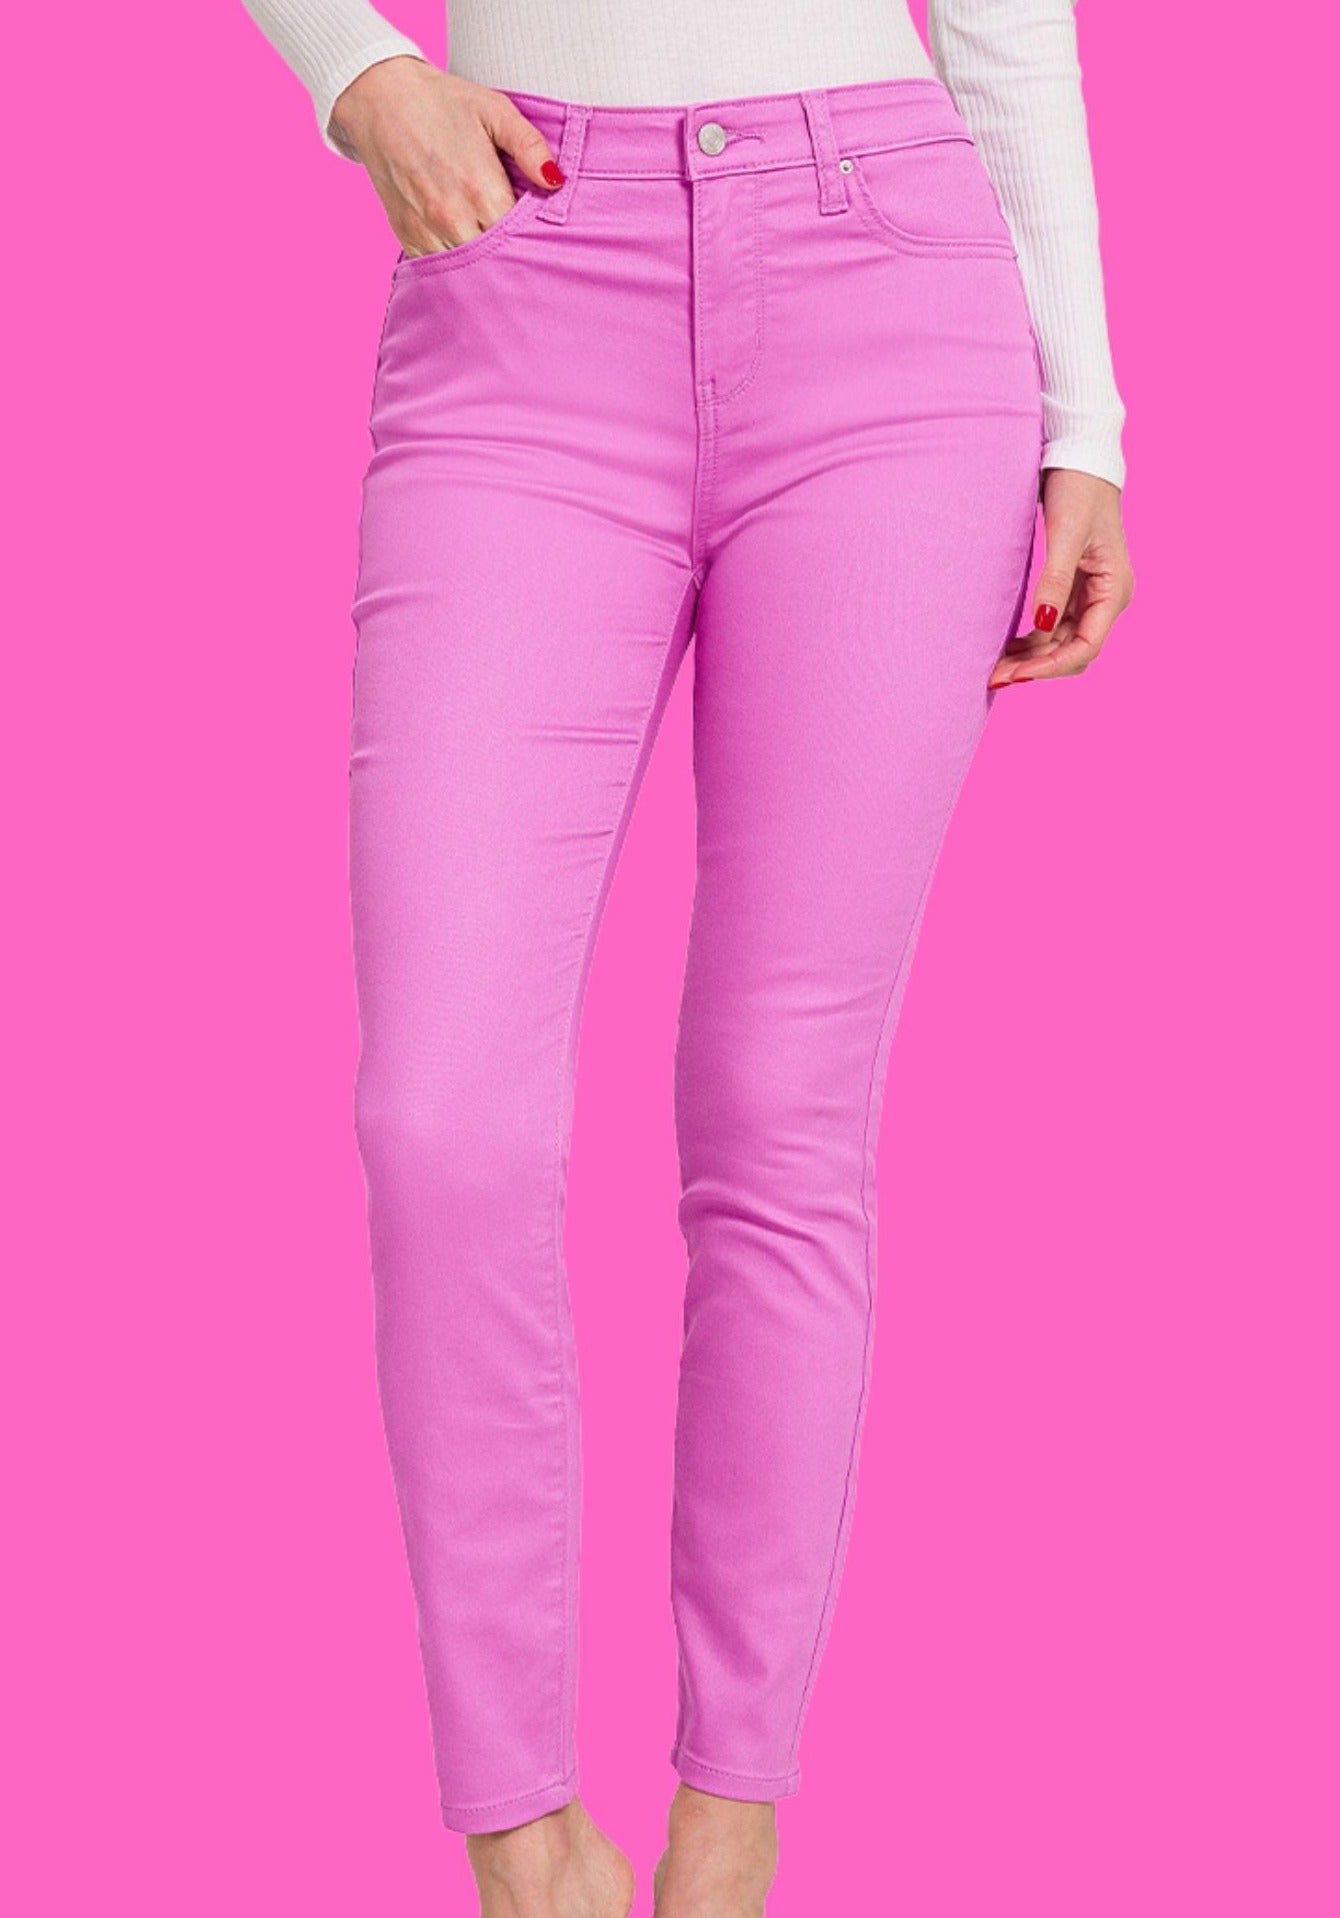 mauve High Rise Skinny Jeans *FINAL SALE*, skinny jean, high rise, mom style, office look, shop style your senses by mallory fitzsimmons